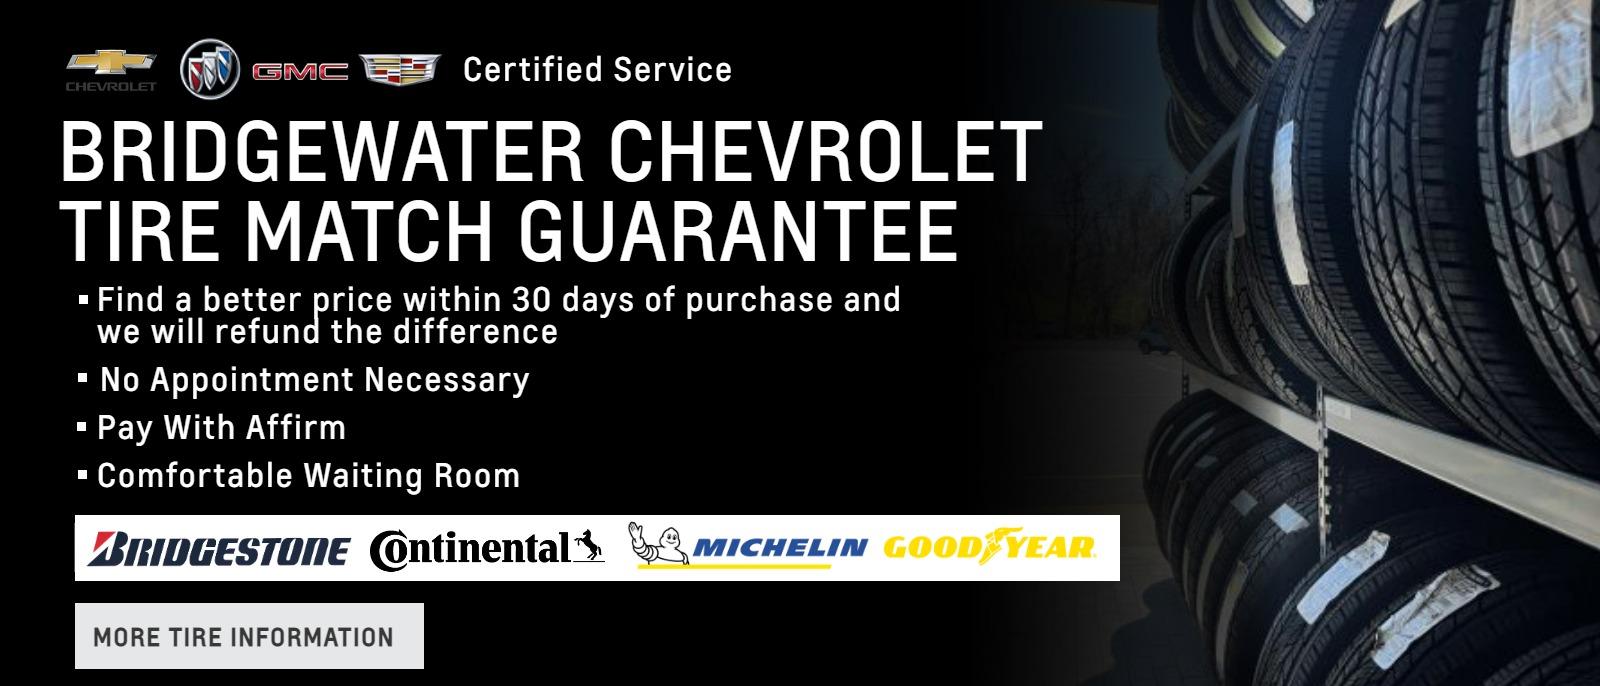 BRIDGEWATER CHEVROLET TIRE MATCH GUARANTEE

Find a better price within 30 days of purchase and we will refund the difference
No Appointment Necessary
Pay With Affirm
Comfortable Waiting Room